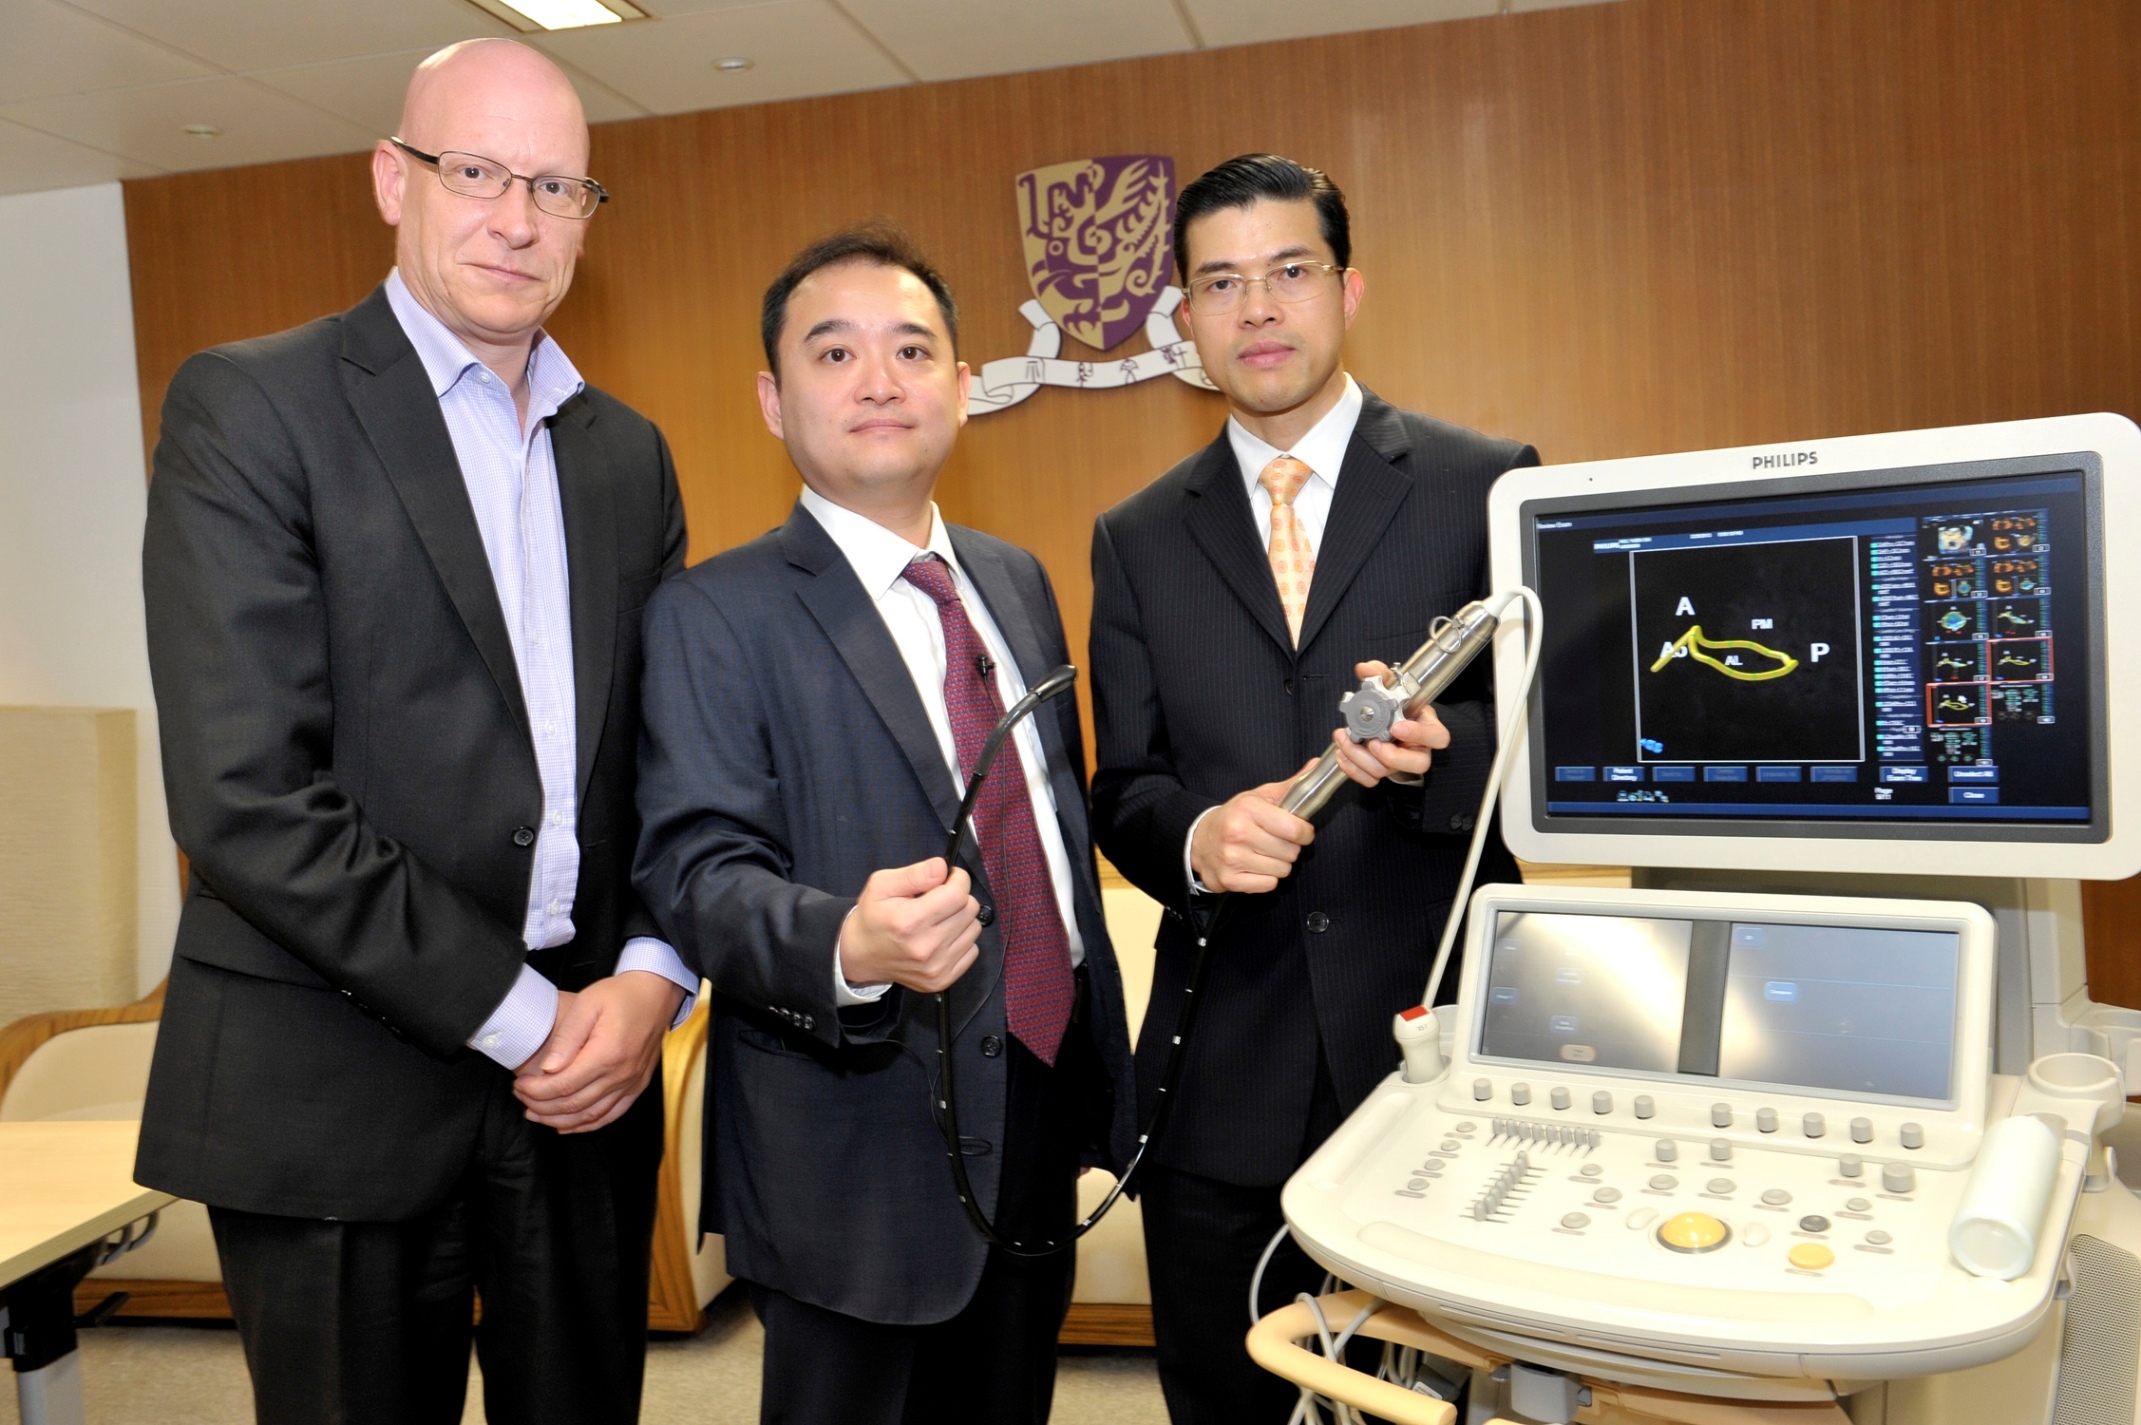 (From left) Professor Malcolm J. Underwood; Professor Pui Wai LEE and Professor Cheuk Man YU show the 3D Ultrasound System (Cardiology)